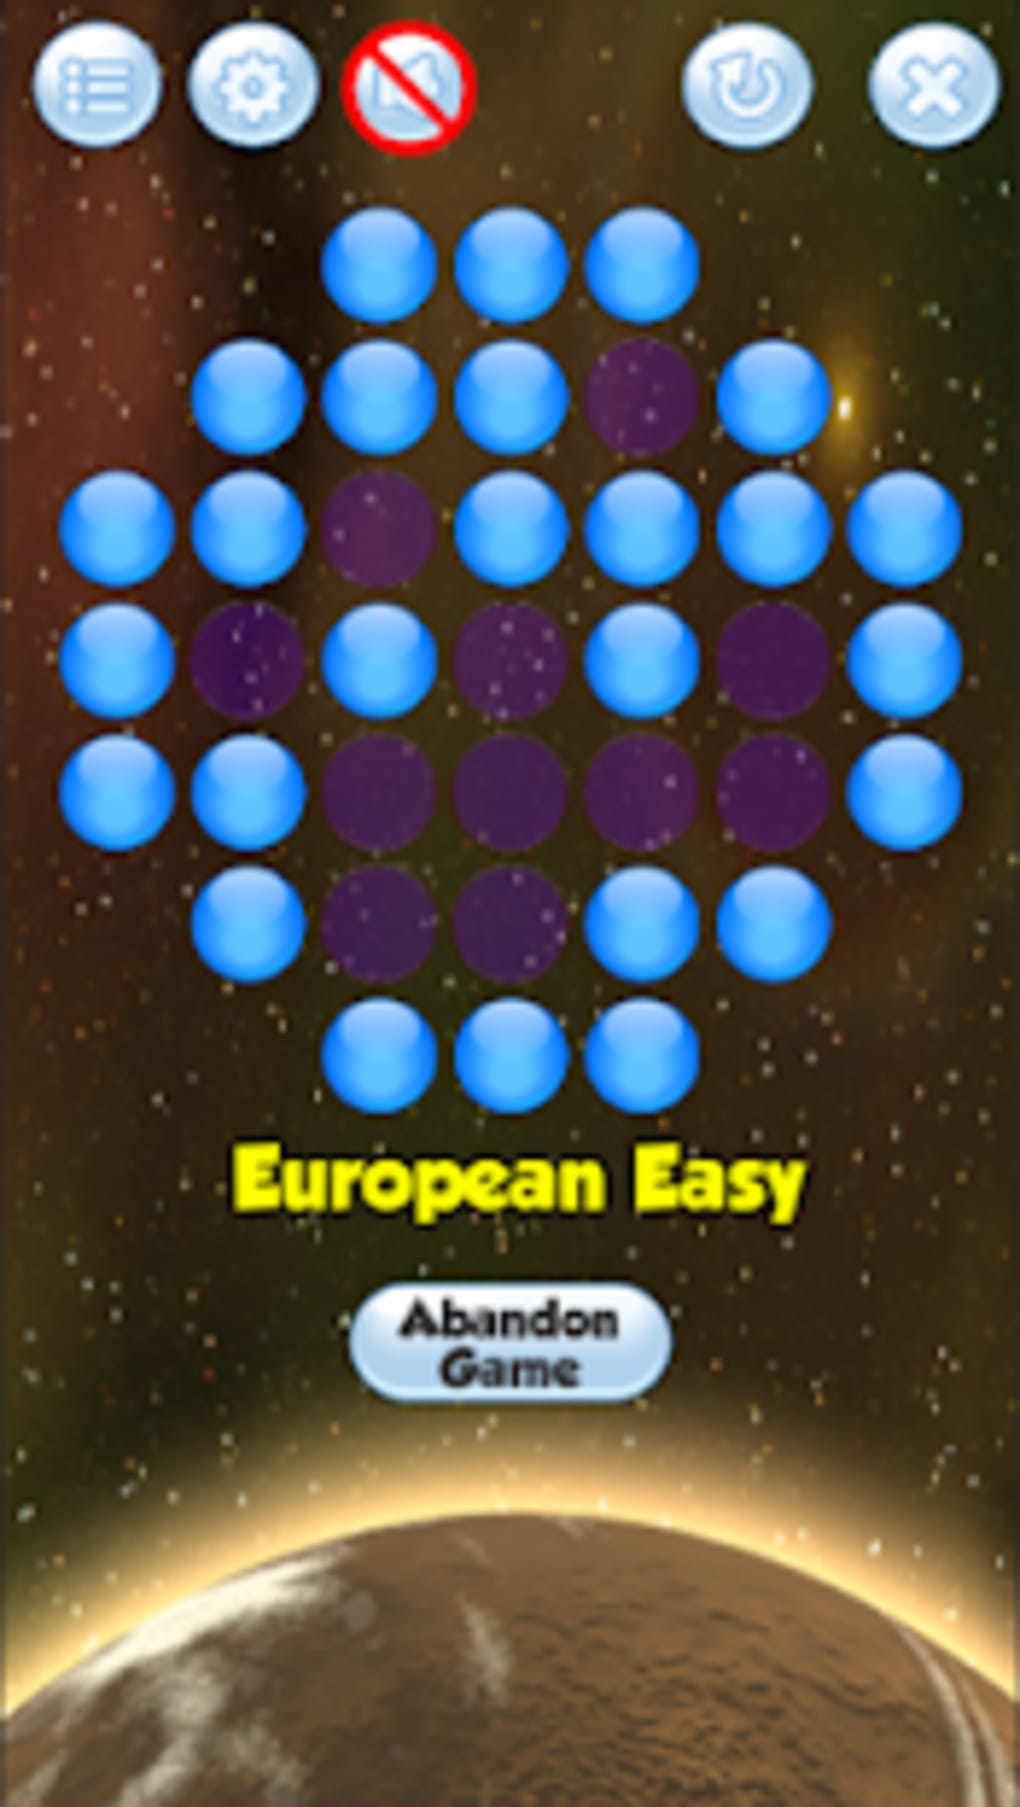 Chess tempo - Train chess tact APK (Android Game) - Free Download